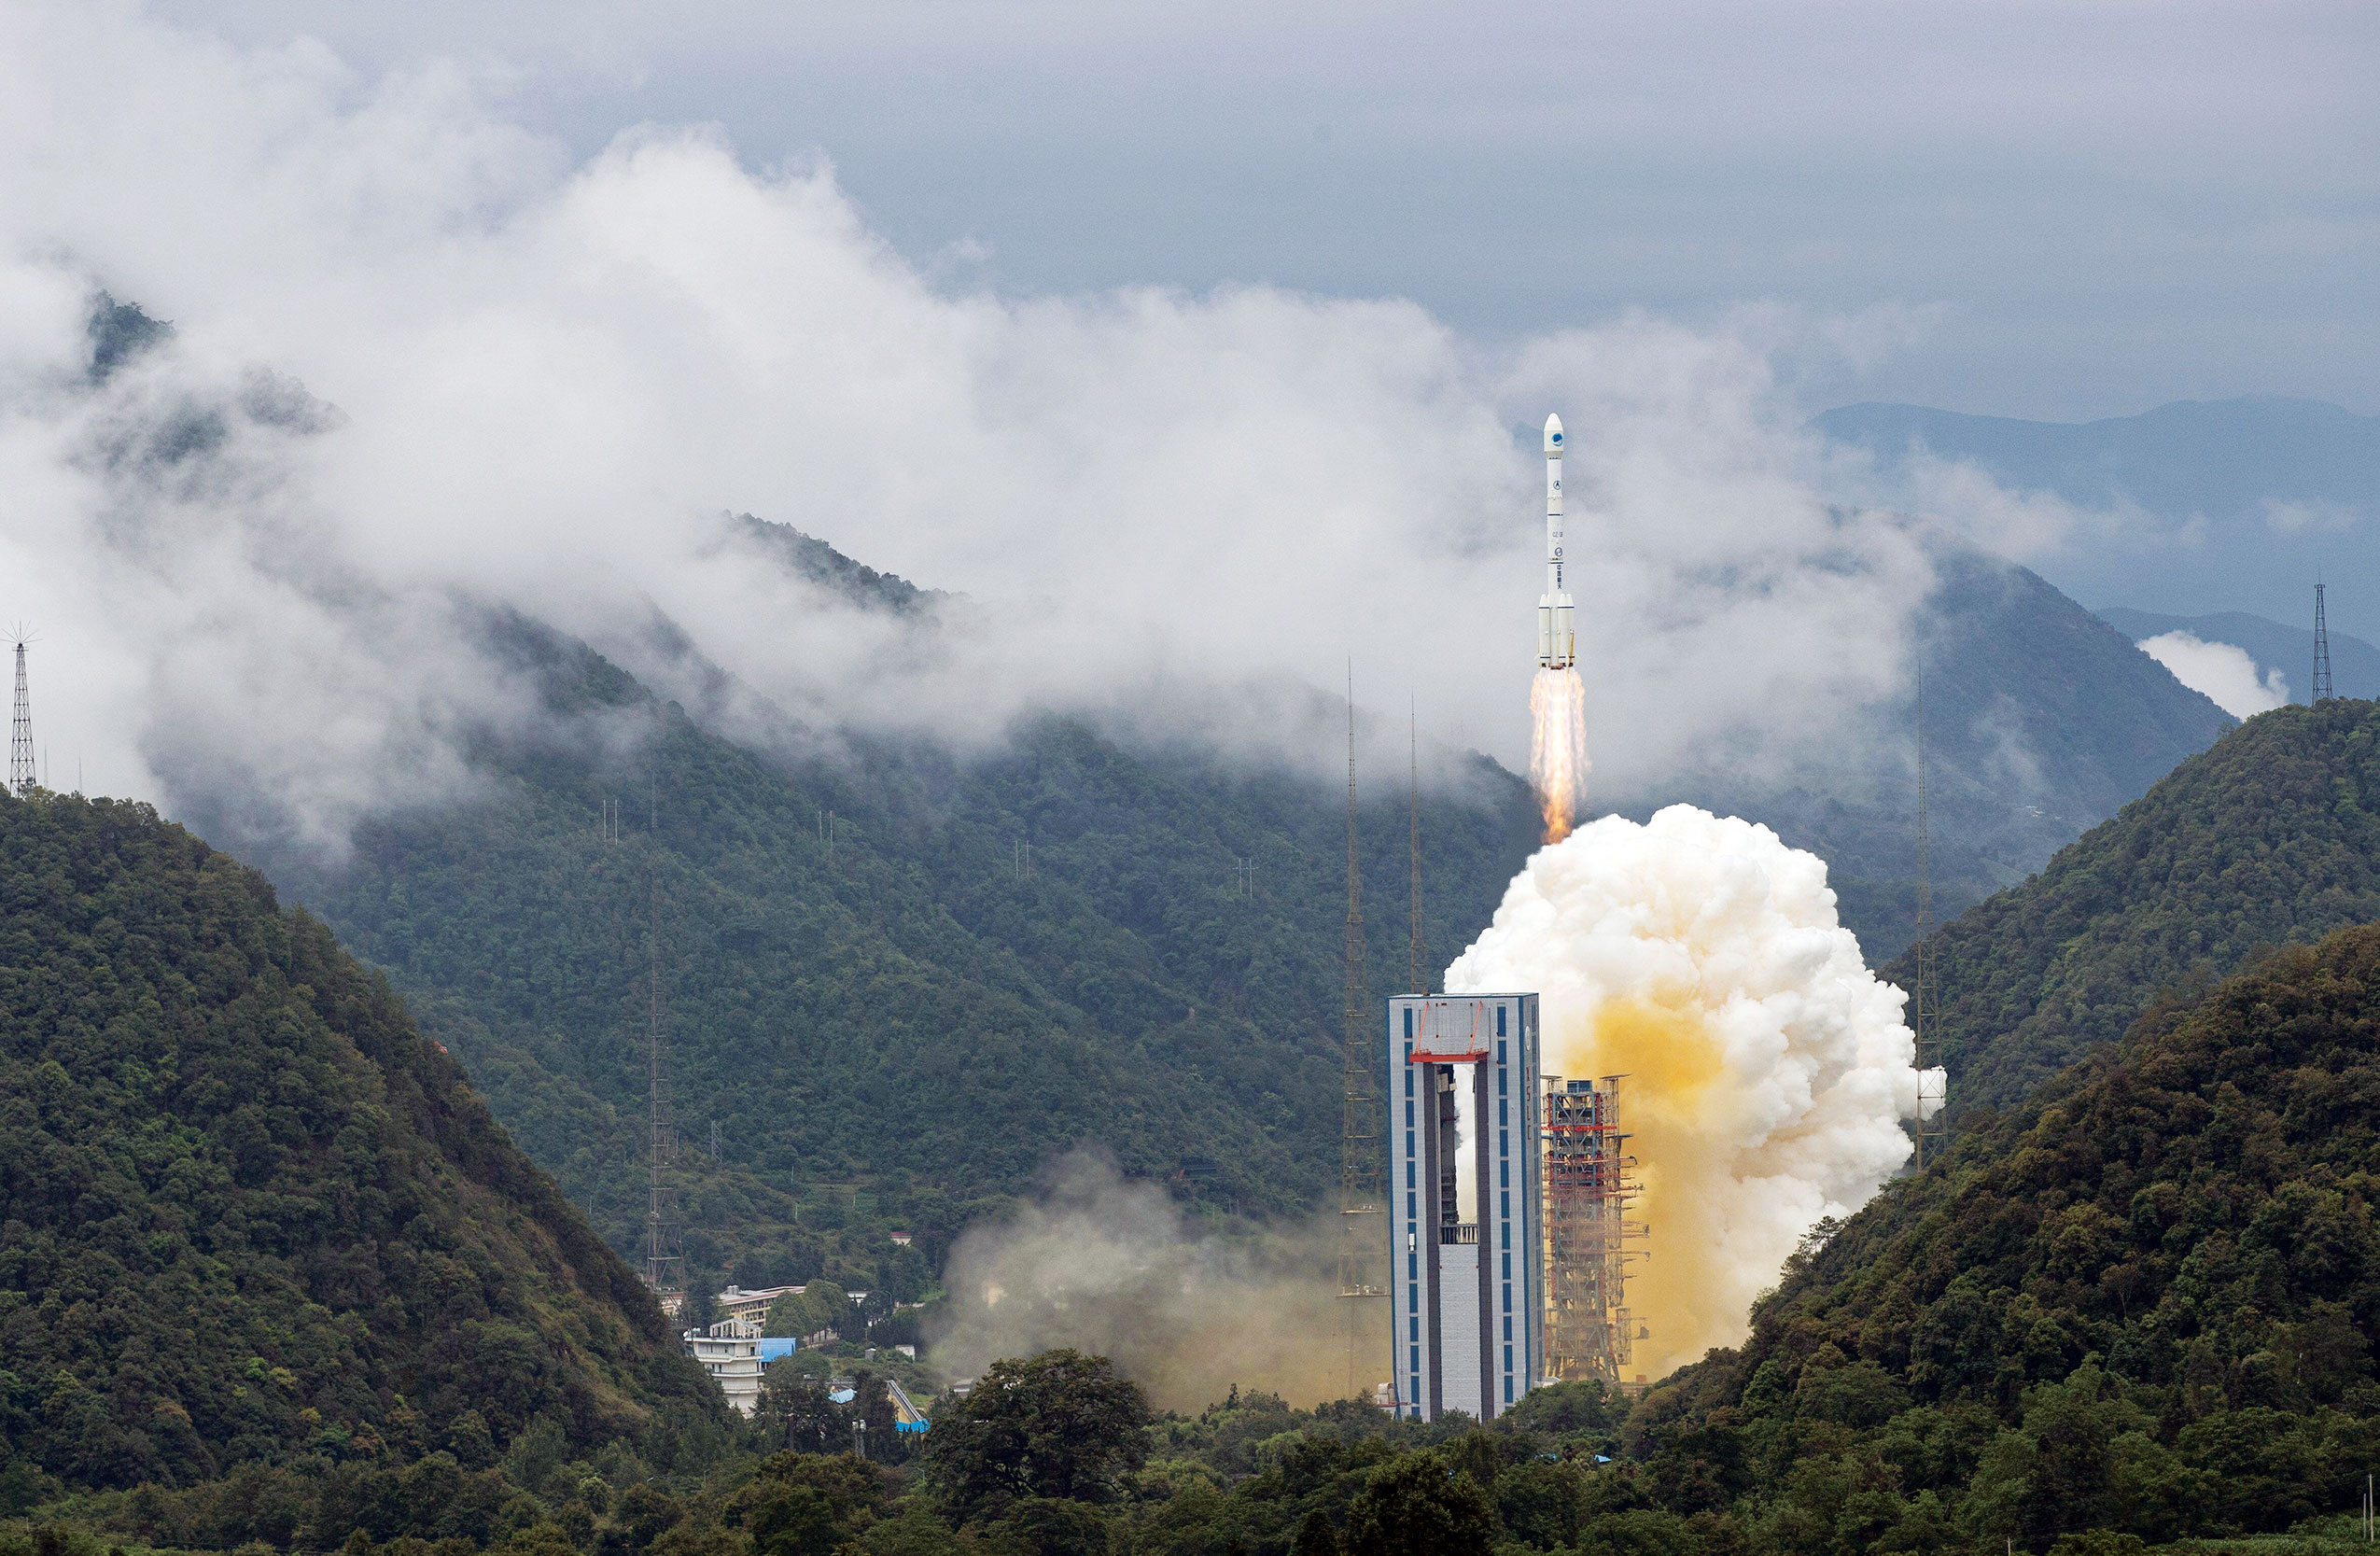 China's Earth science satellite transmits images home - Xinhua